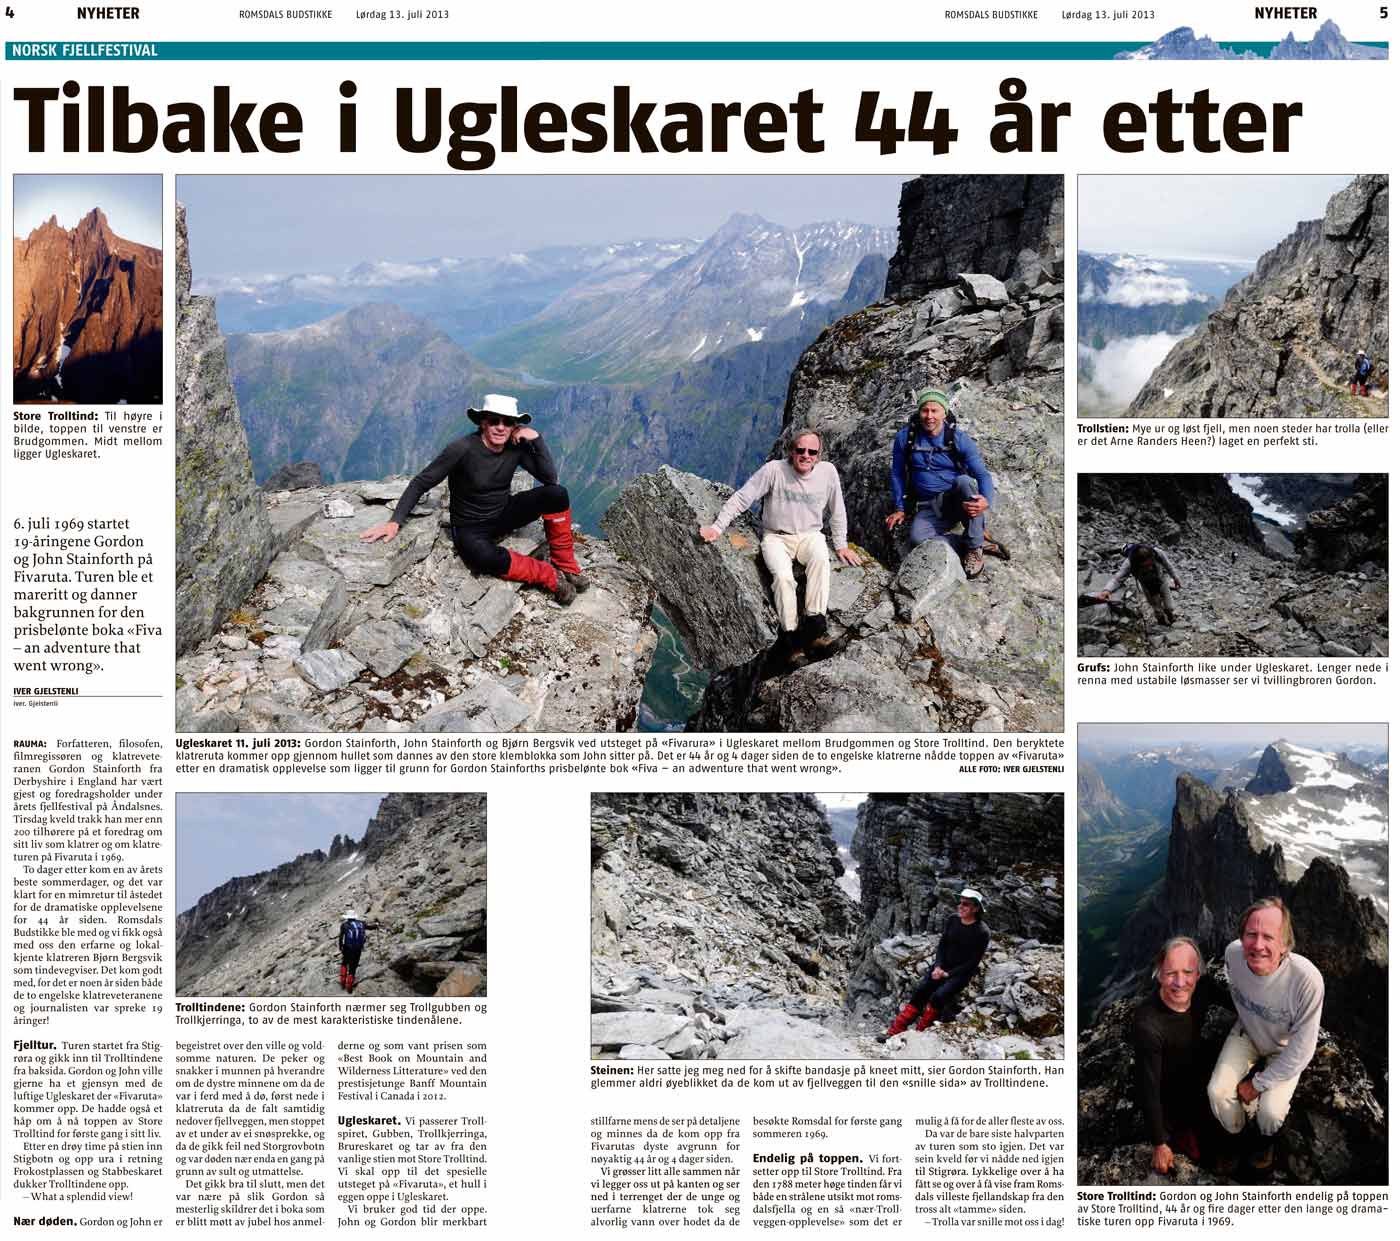 Article Iver Gjelstenli wrote about our climb in the local Romsdal newpaper. Click to enlarge